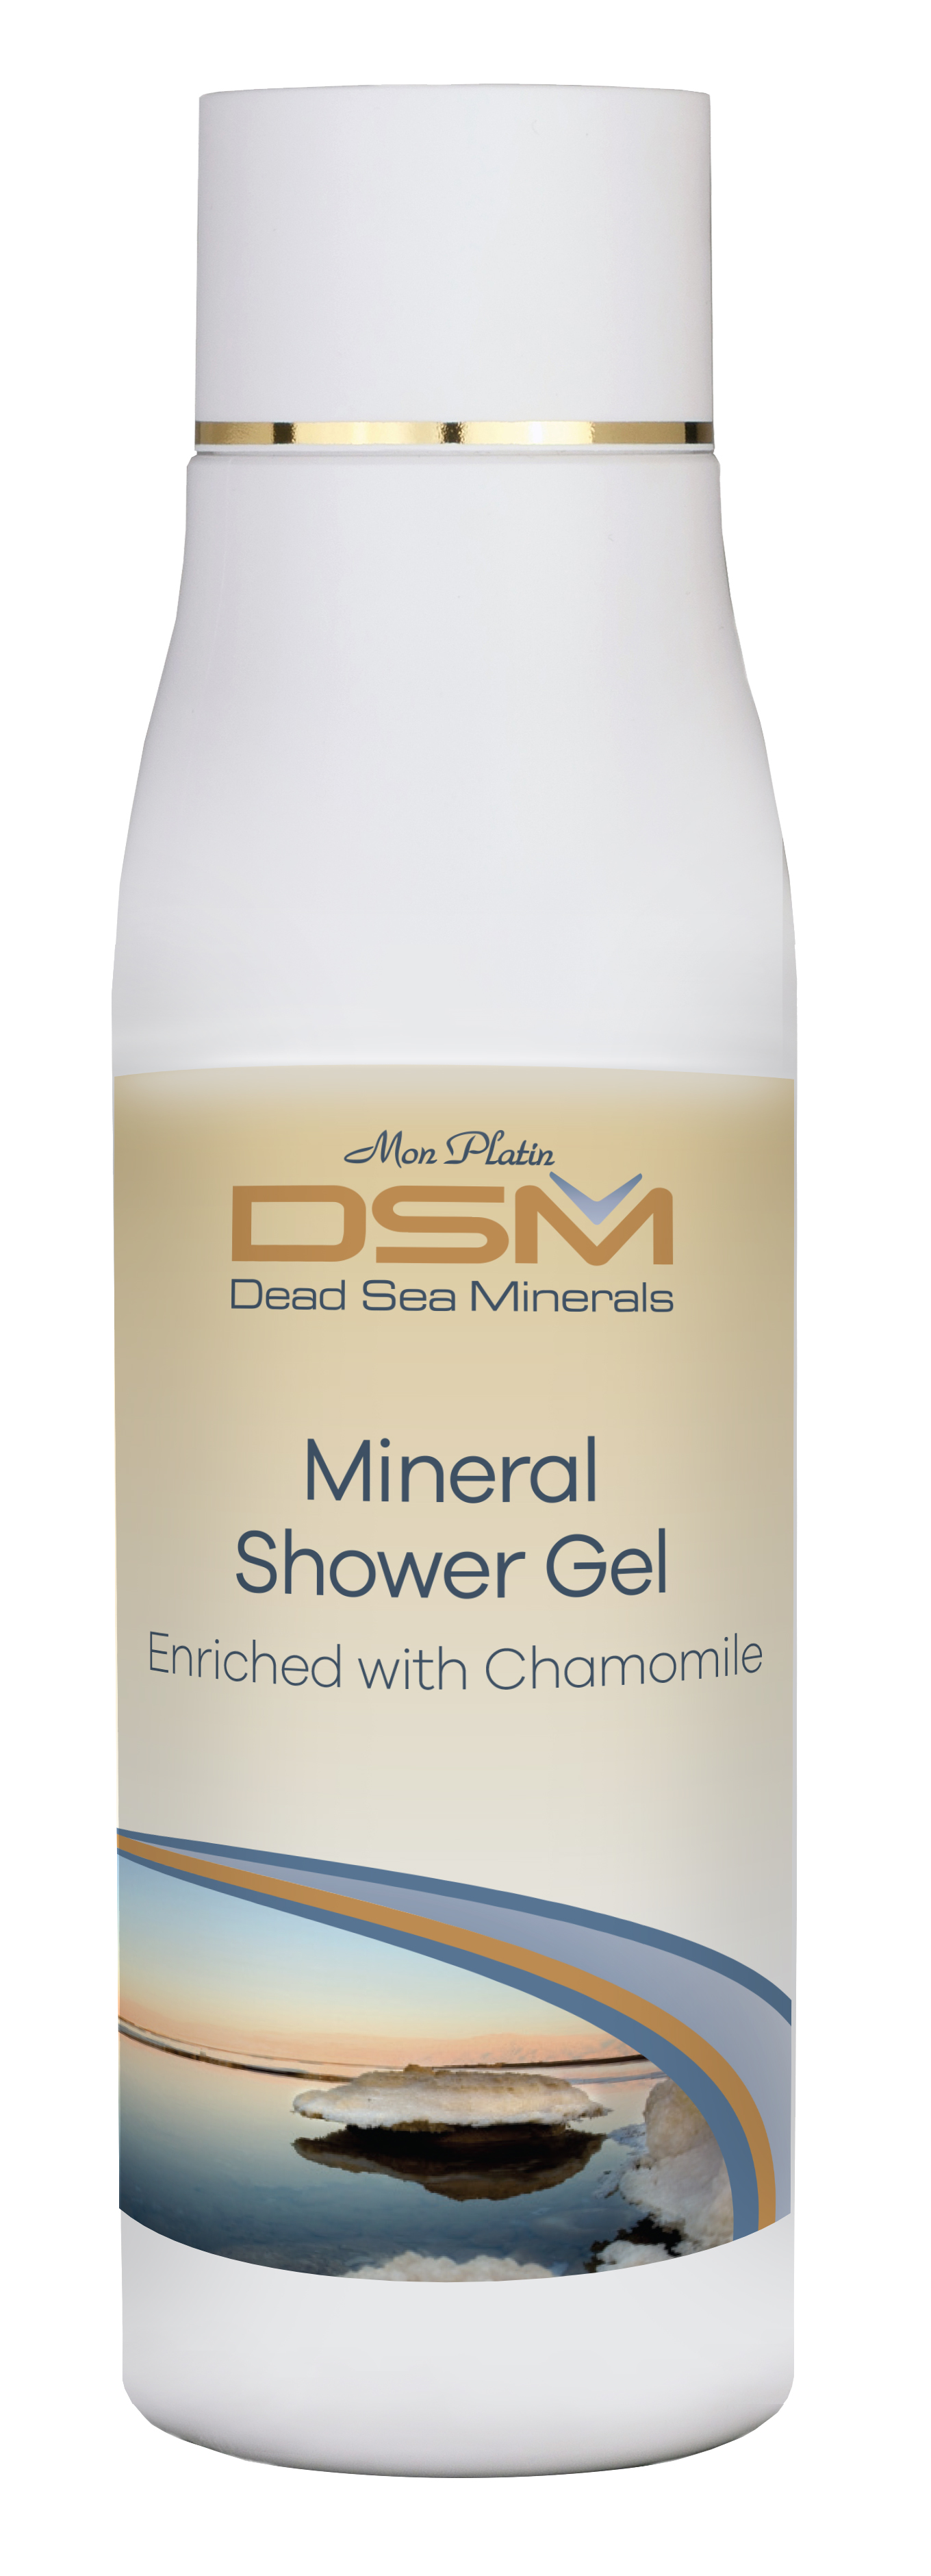 Mineral Shower Gel enriched with Chamomile